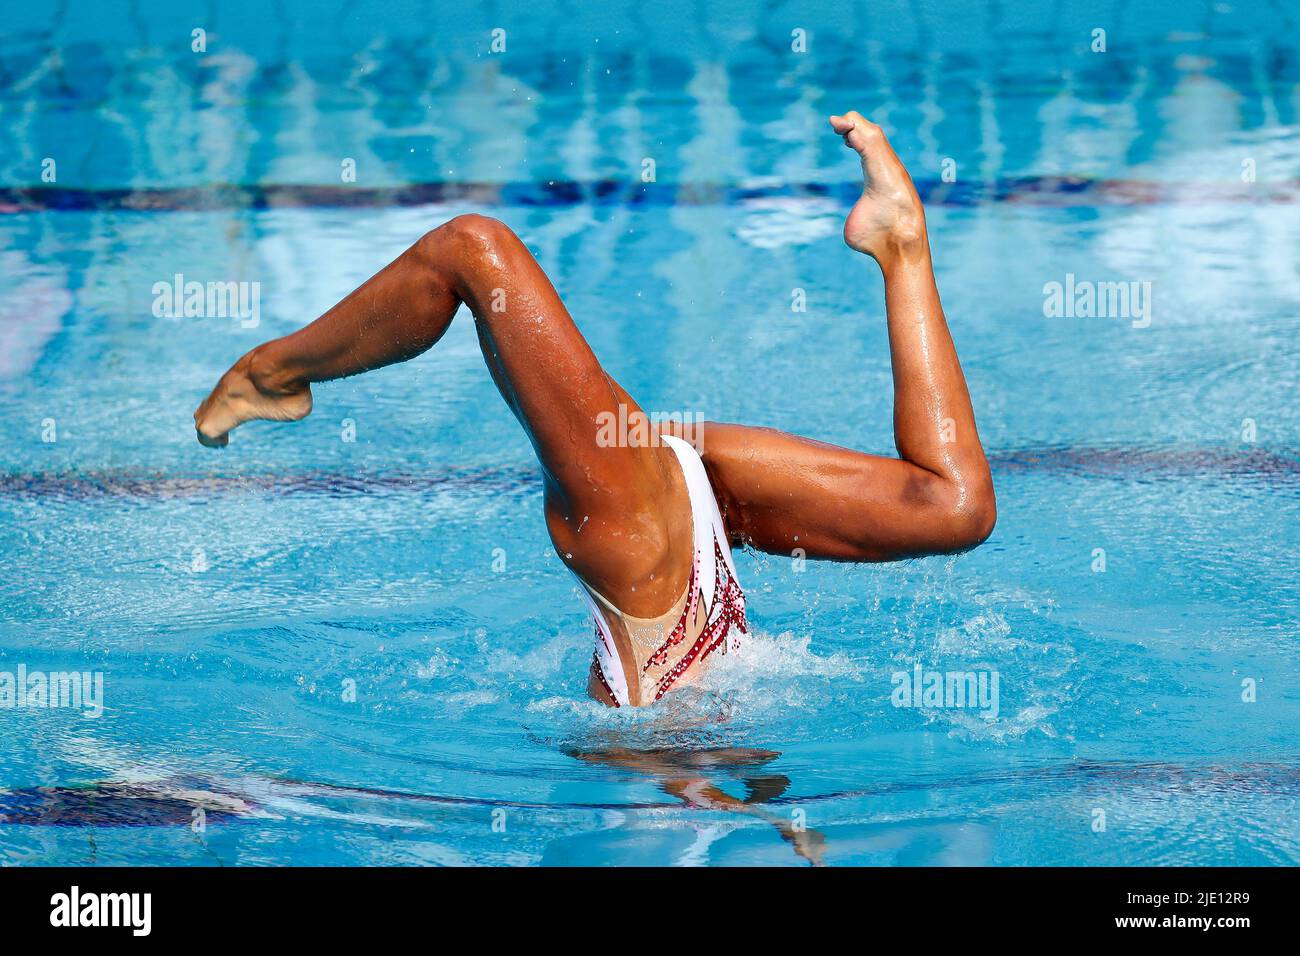 Budapest, Hungary, 22nd June 2022. Linda Cerruti of Italy competes in the Women Solo Free Final on day six of the Budapest 2022 FINA World Championships at Alfred Hajos National Aquatics Complex in Budapest, Hungary. June 22, 2022. Credit: Nikola Krstic/Alamy Stock Photo